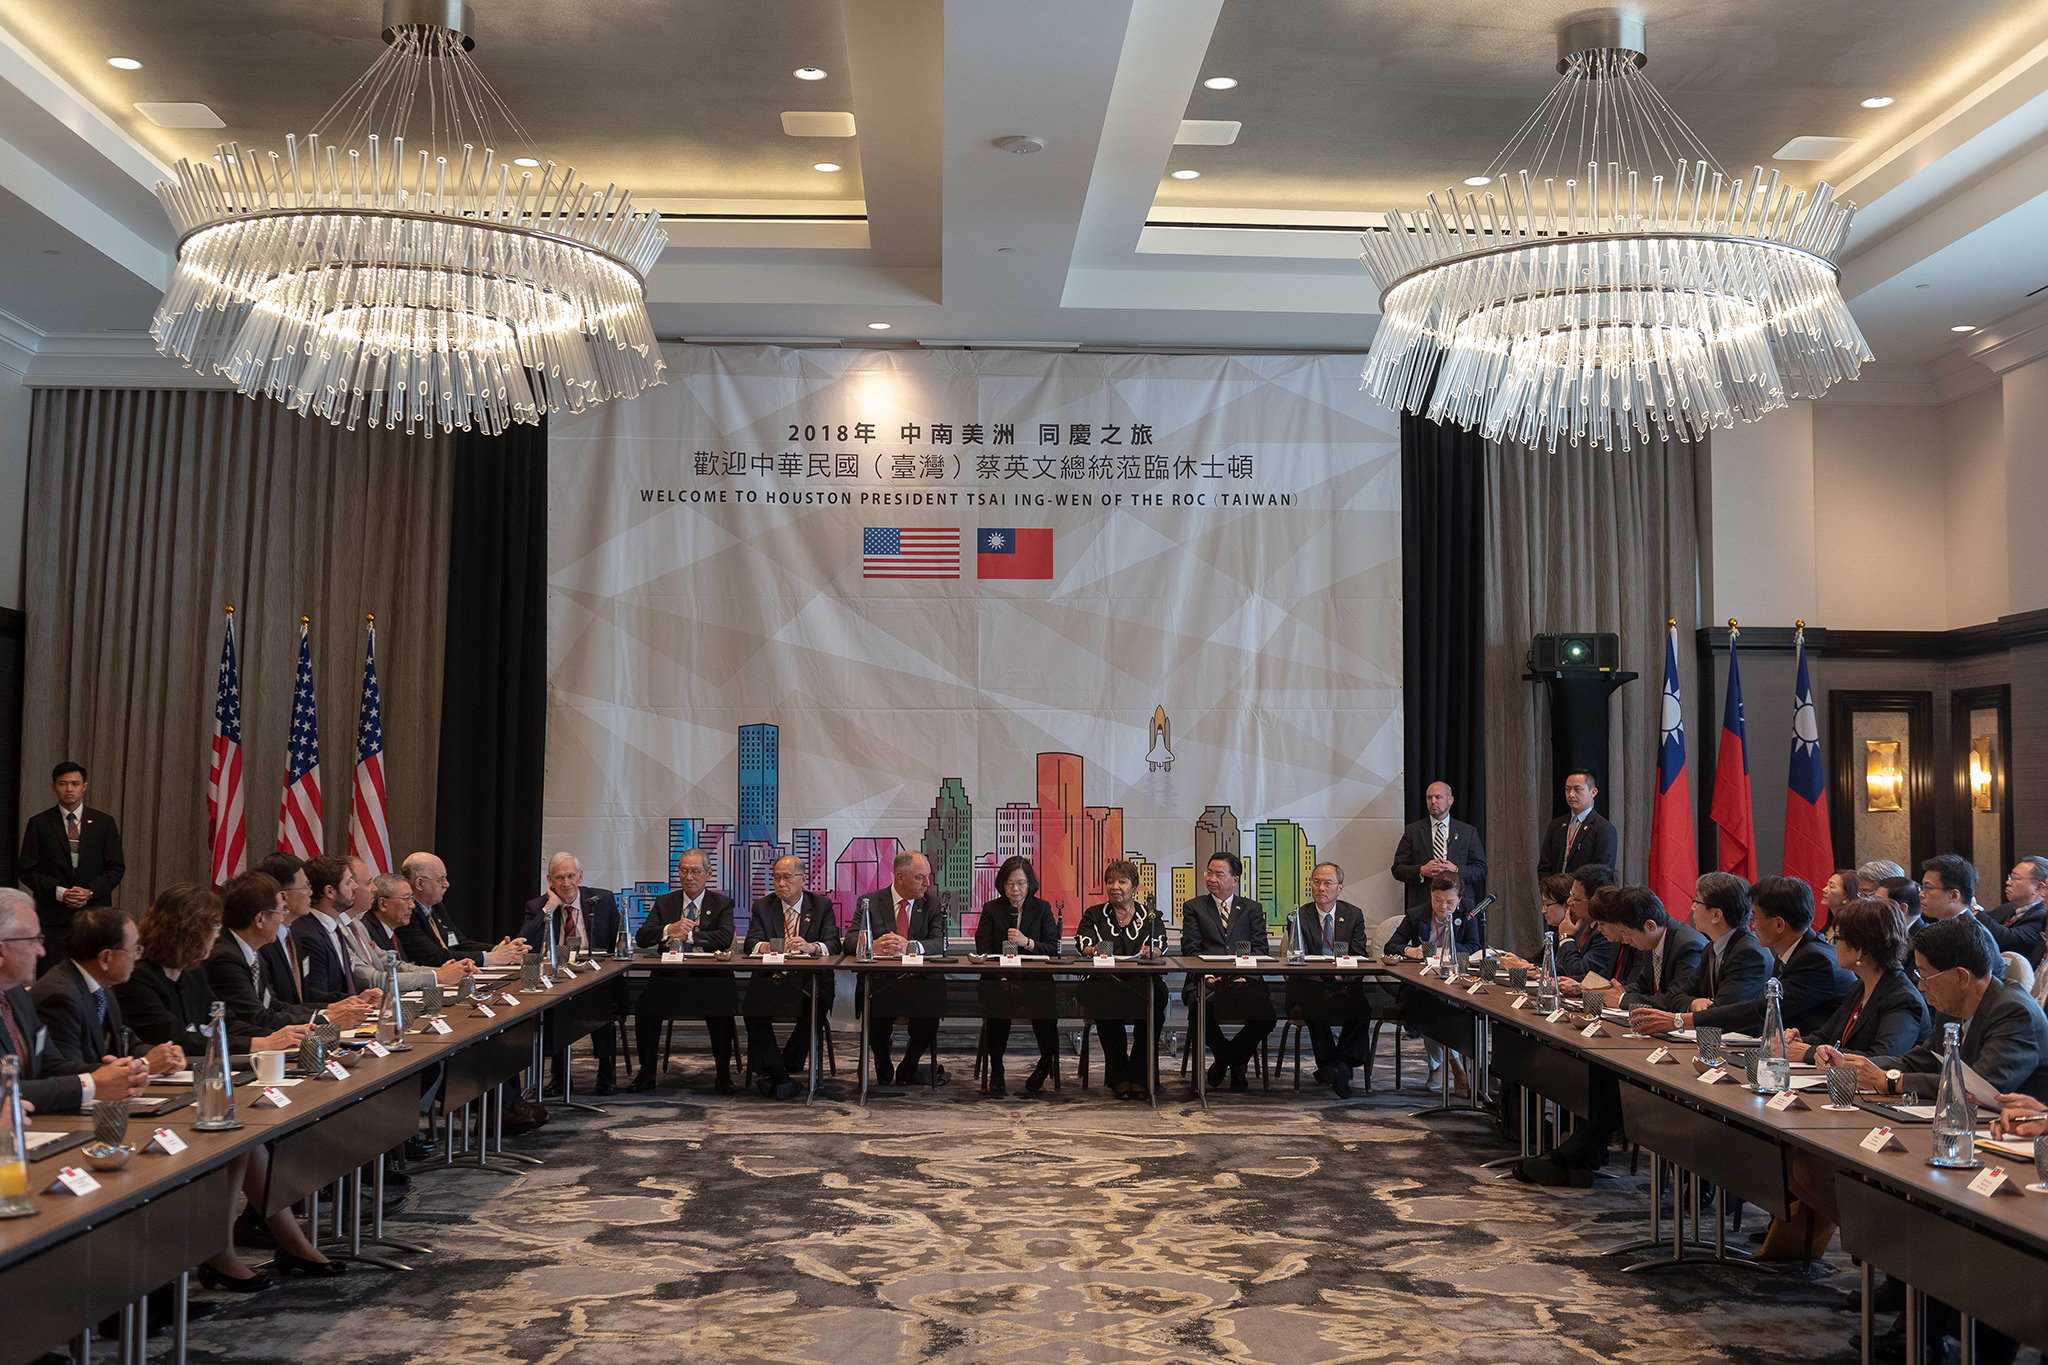 President Tsai attends business roundtable with Taiwanese companies in Houston, Texas